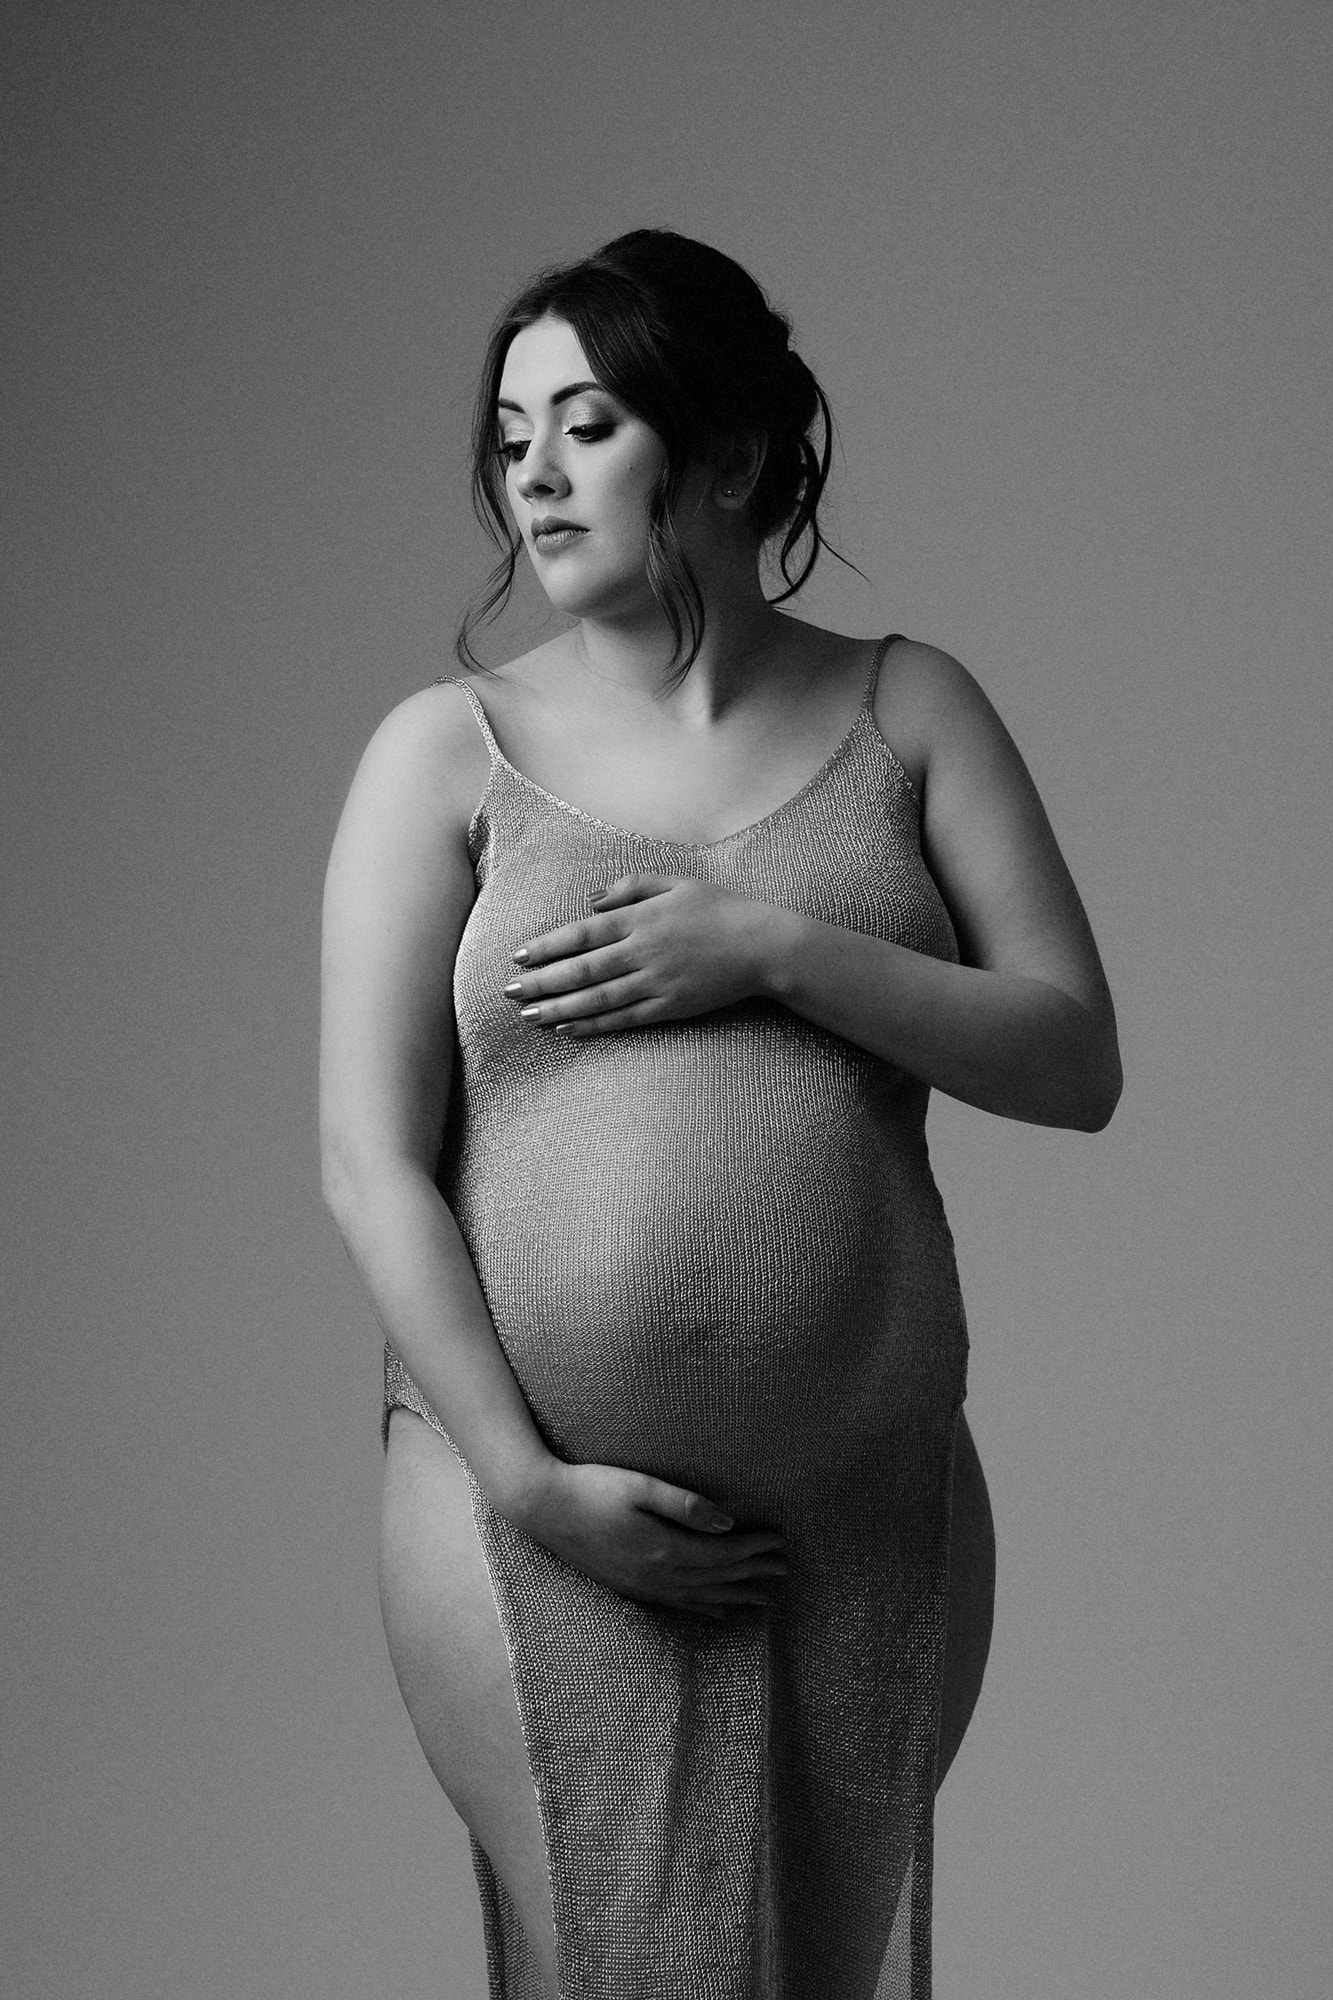 Simple Black and White Maternity Photoshoot Tianna J-Williams Photography